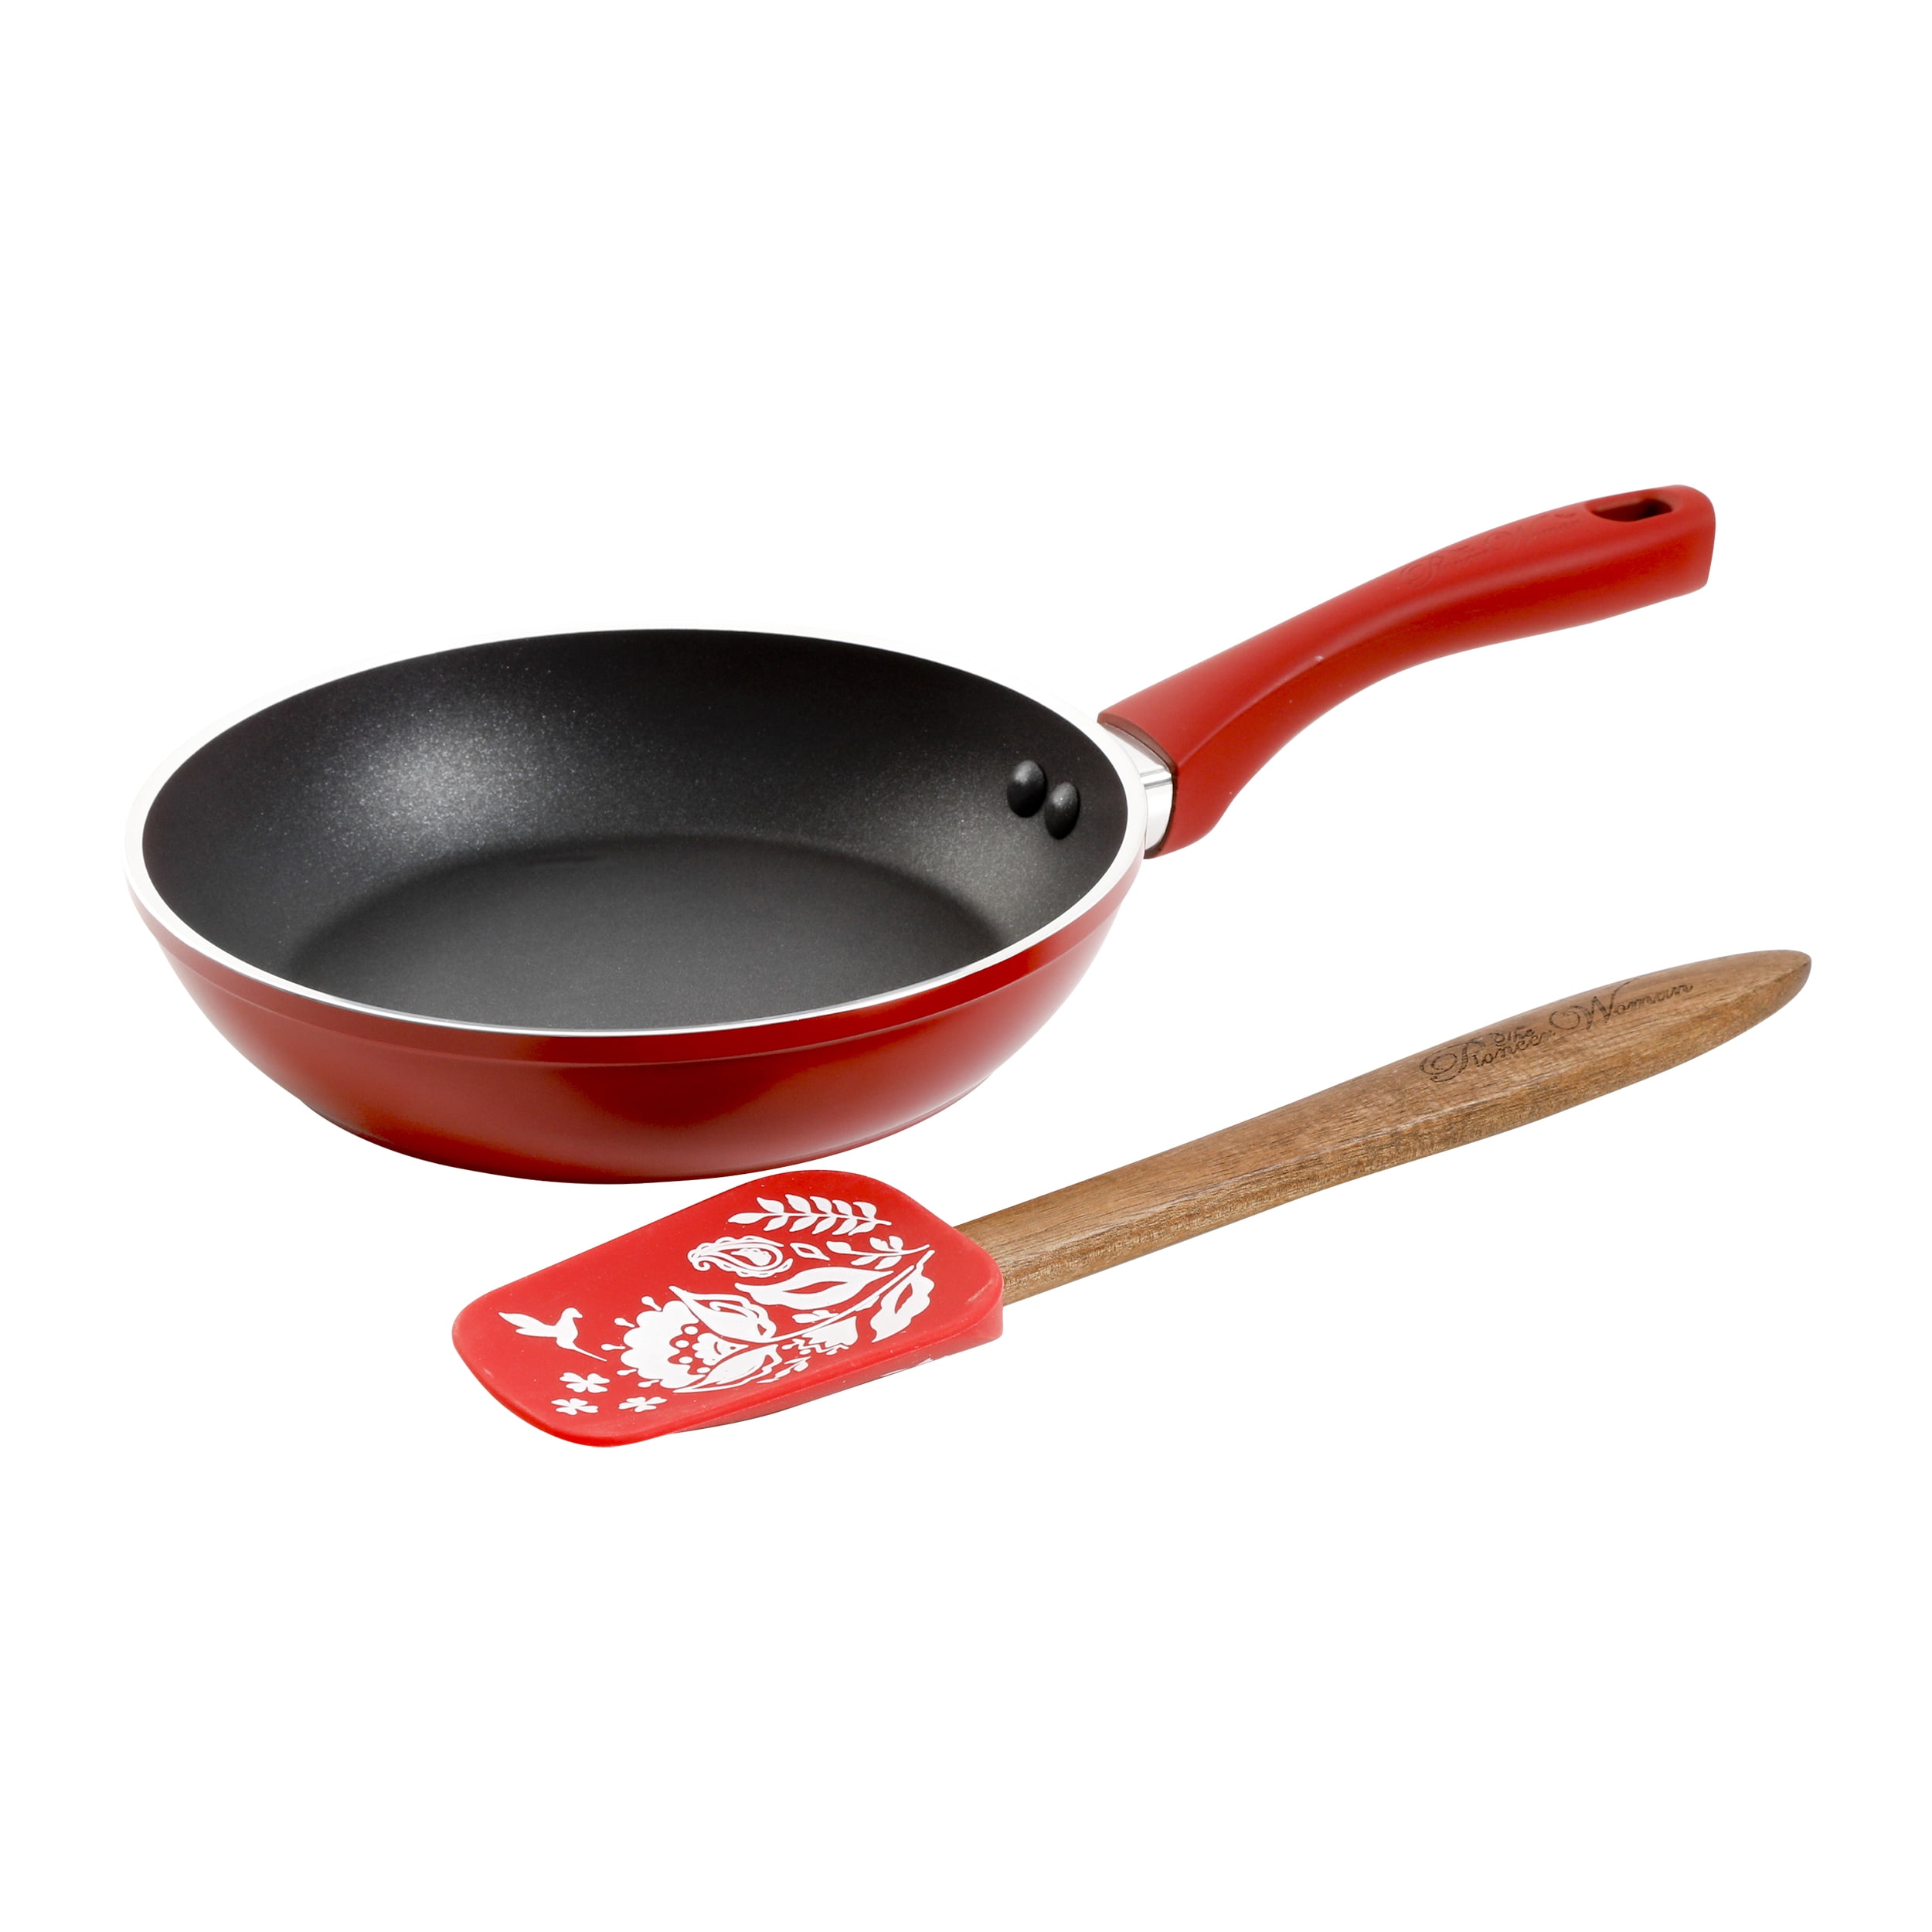 TELEBrands 10688-6 12-Inch Red Copper Non-Stick Pan at Sutherlands